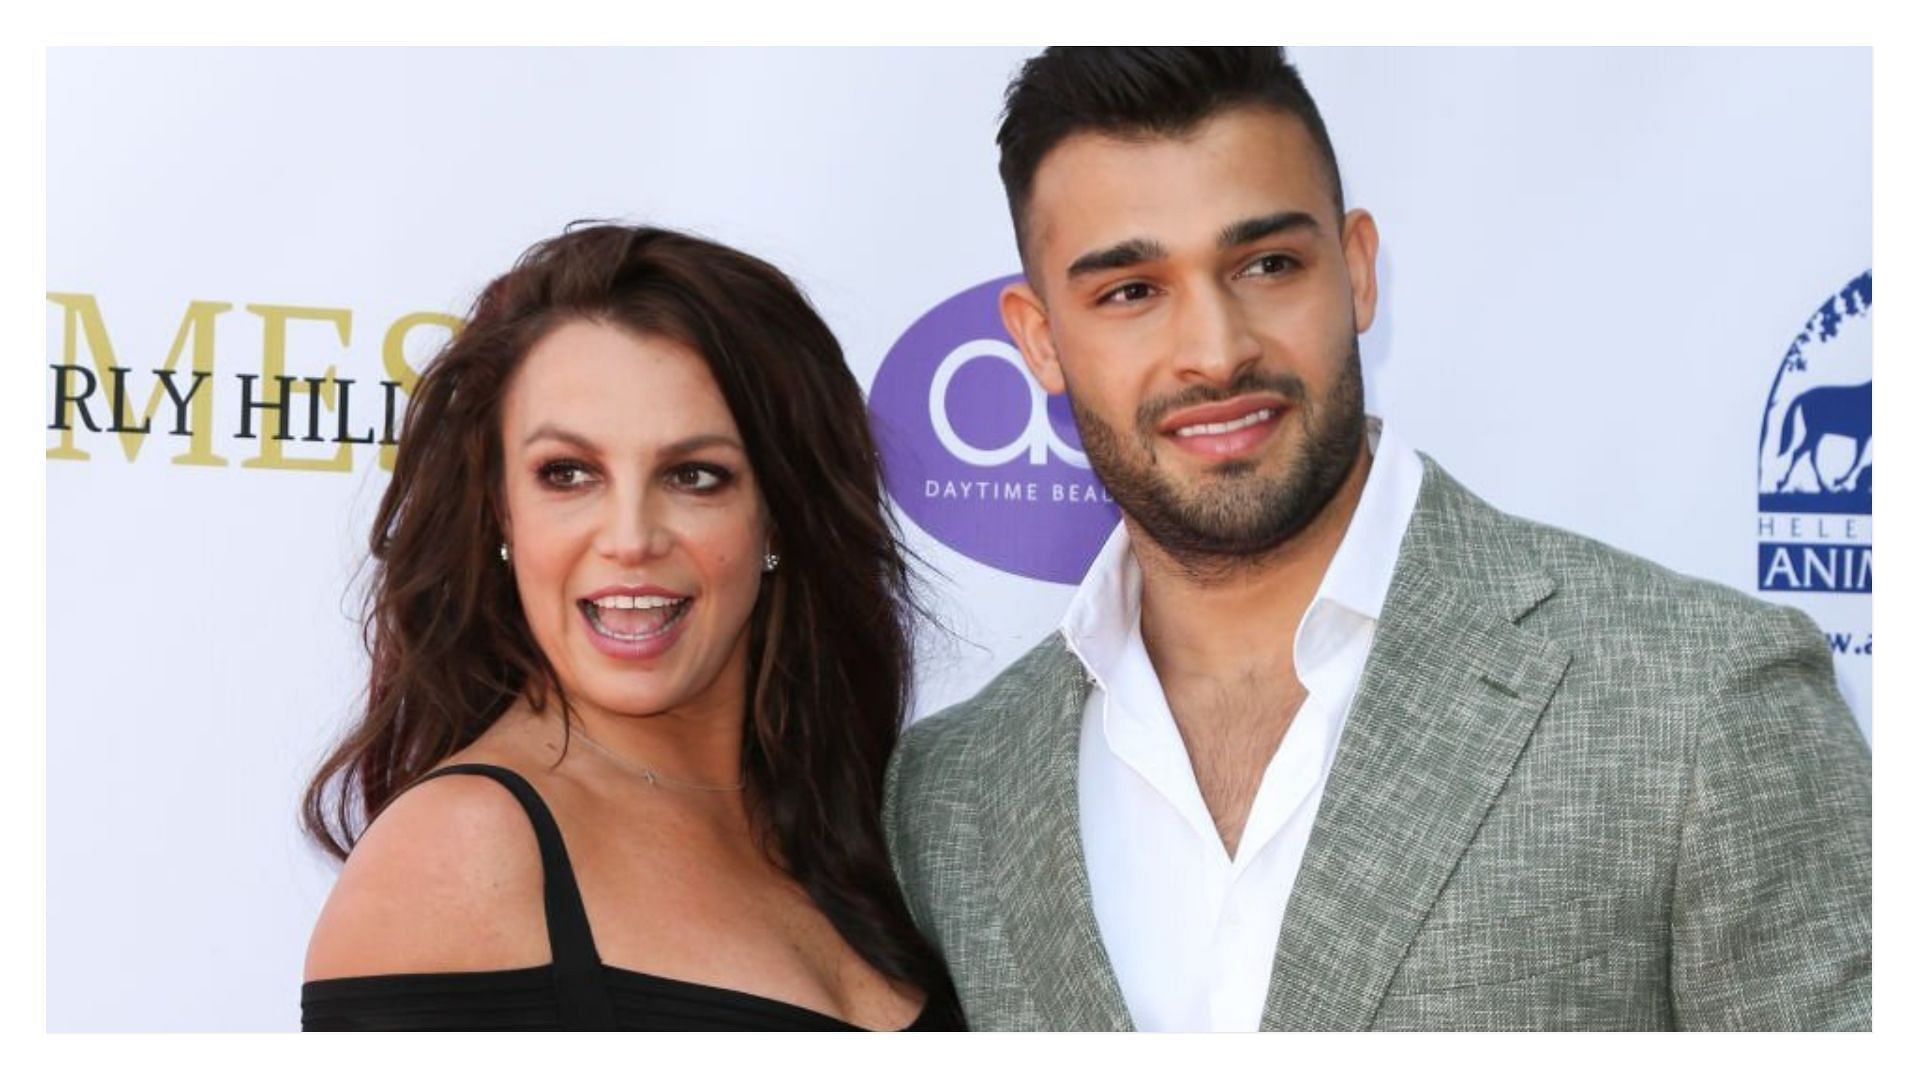 Britney Spears and Sam Asghari tied the knot recently (Image via Paul Archuleta/Getty Images)